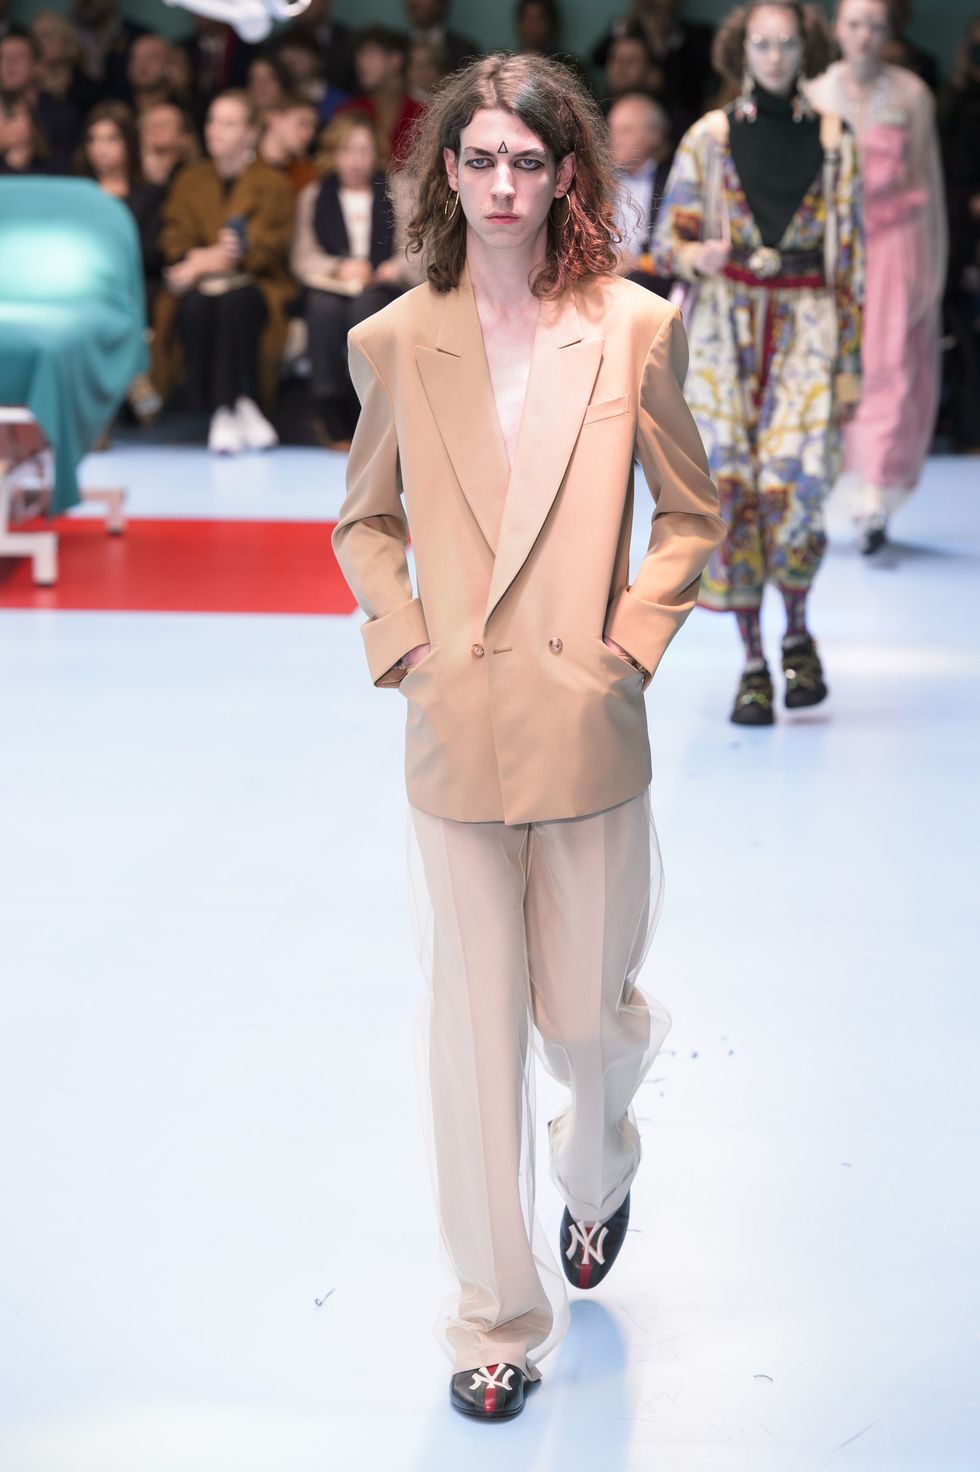 90 Looks From Gucci Fall 2018 MFW Show – Gucci Runway at London Fashion ...